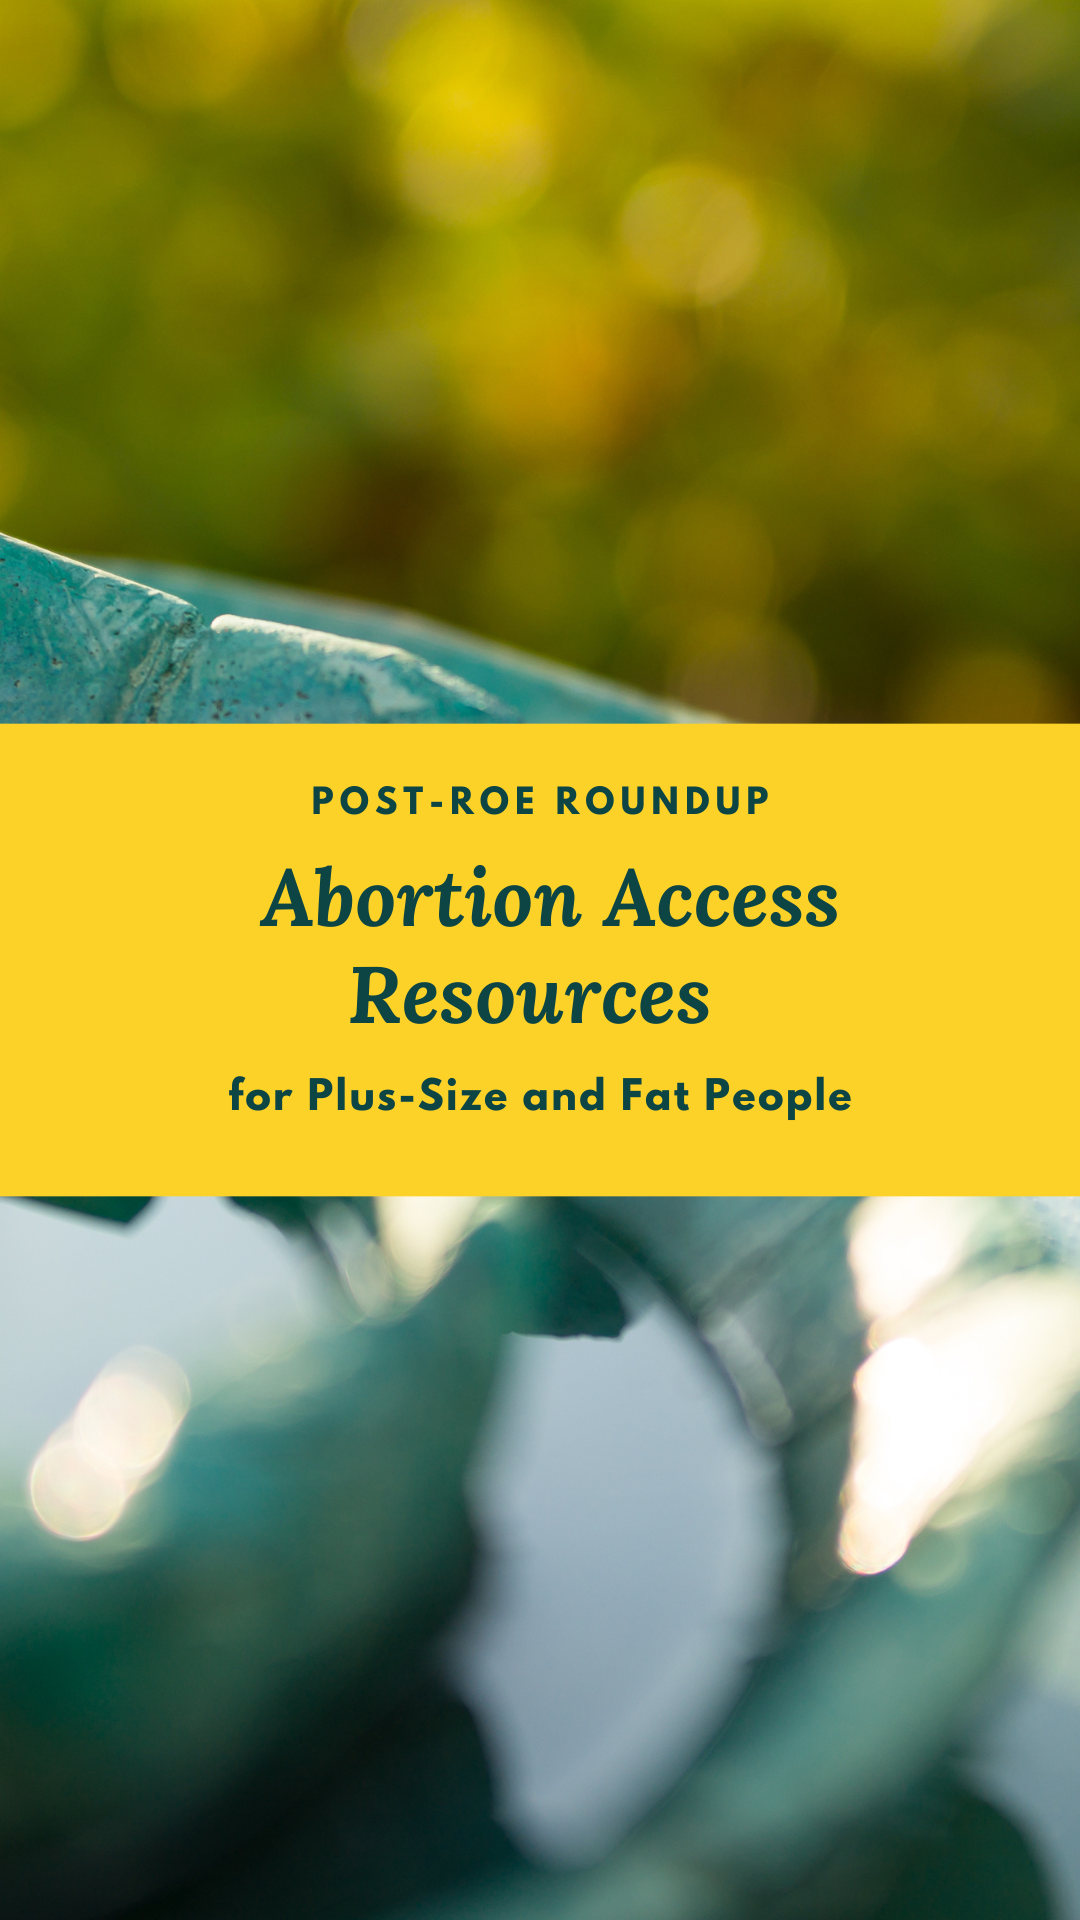 A photo of a teal blue birdbath full of water behind a yellow bar with the title of this blog post, which is a list of articles and resources for fat, larger-bodied and plus-size people for abortions in the United States.